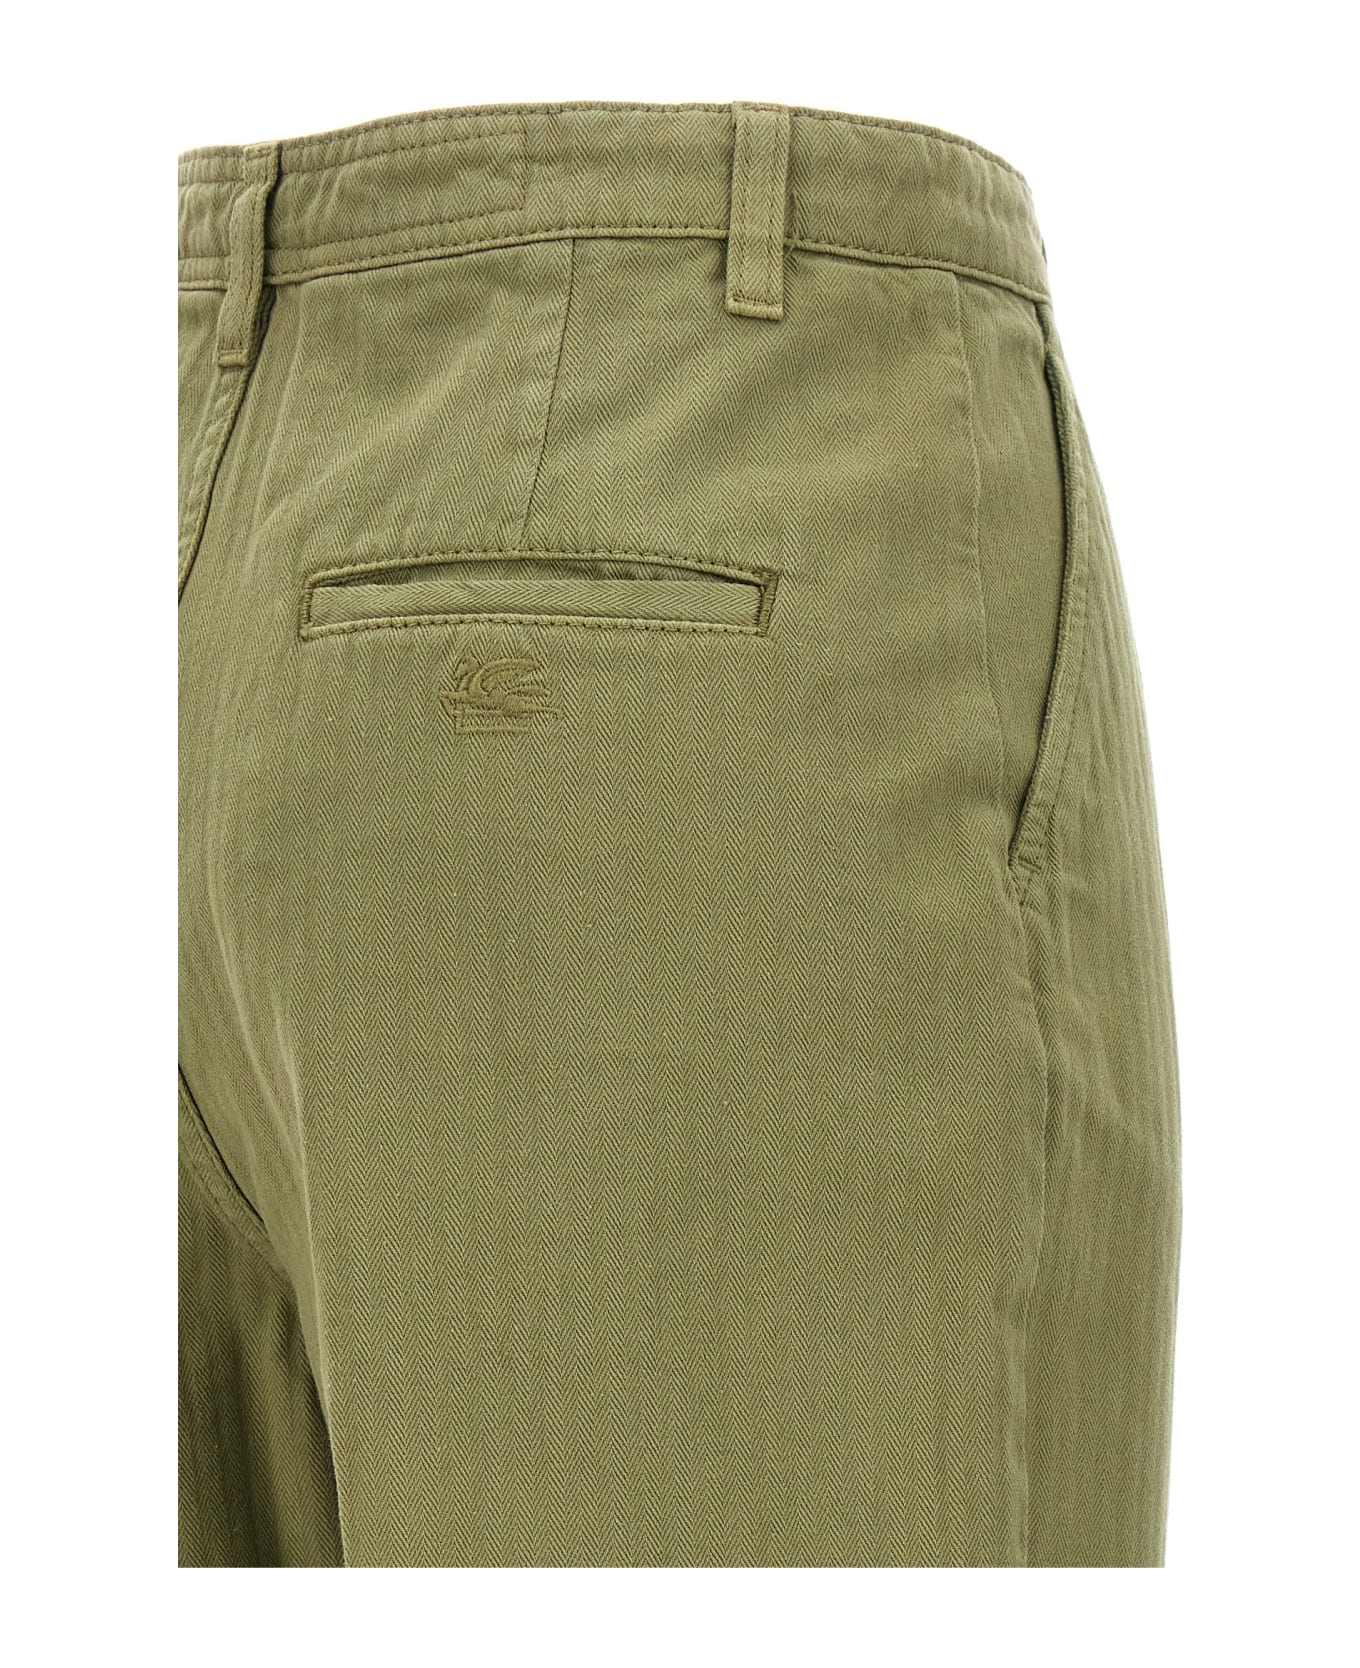 Etro Cropped Chino Pants - Green